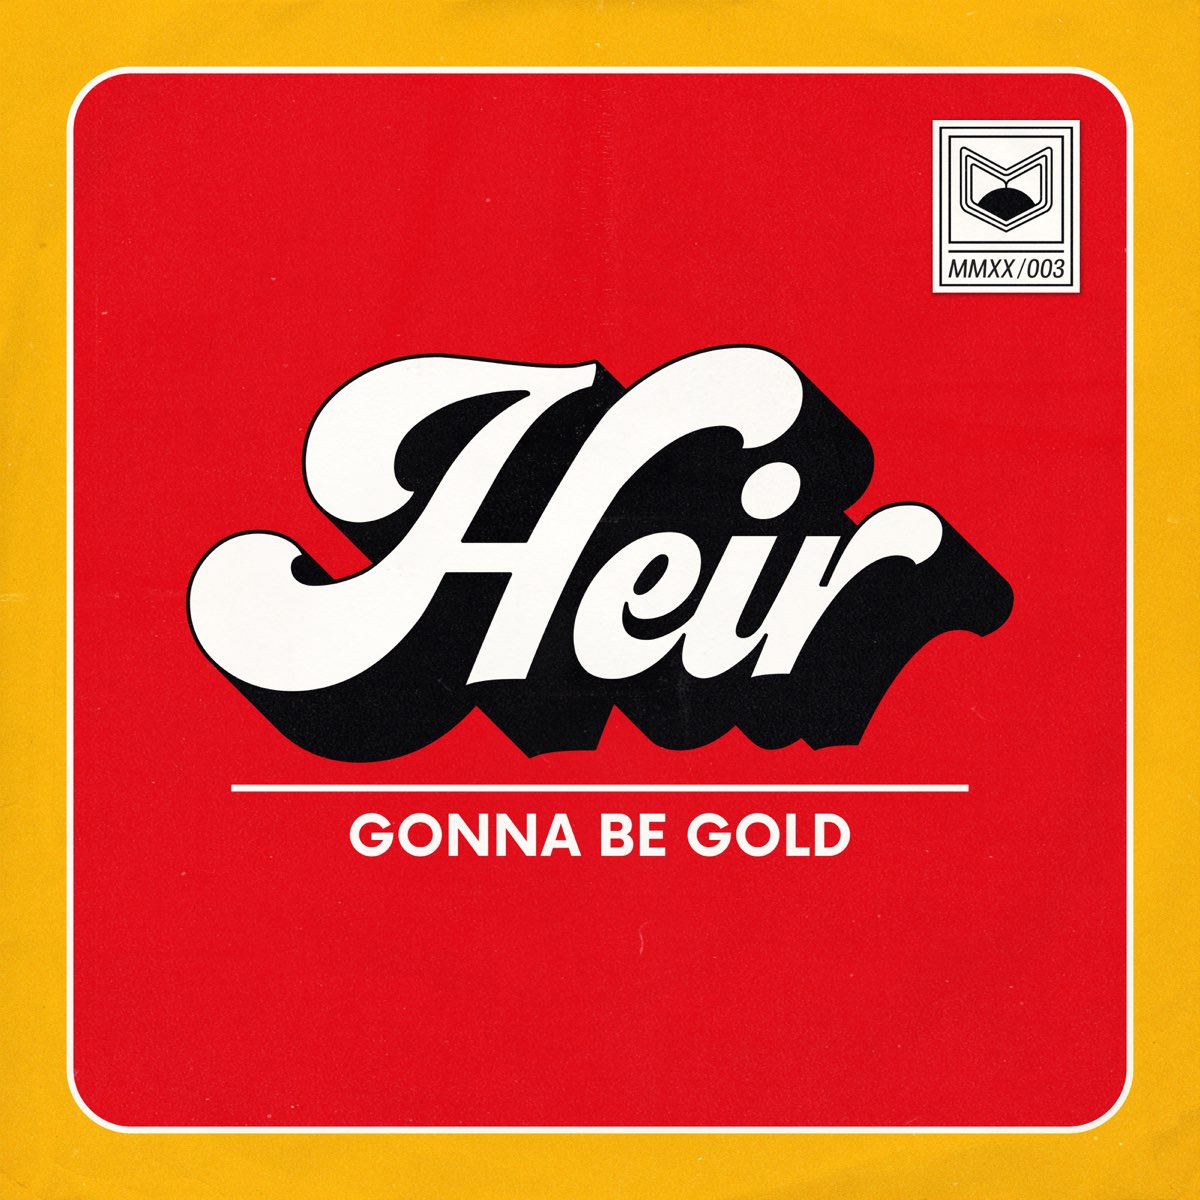 Gonna Be Gold - Single by Heir on Apple Music